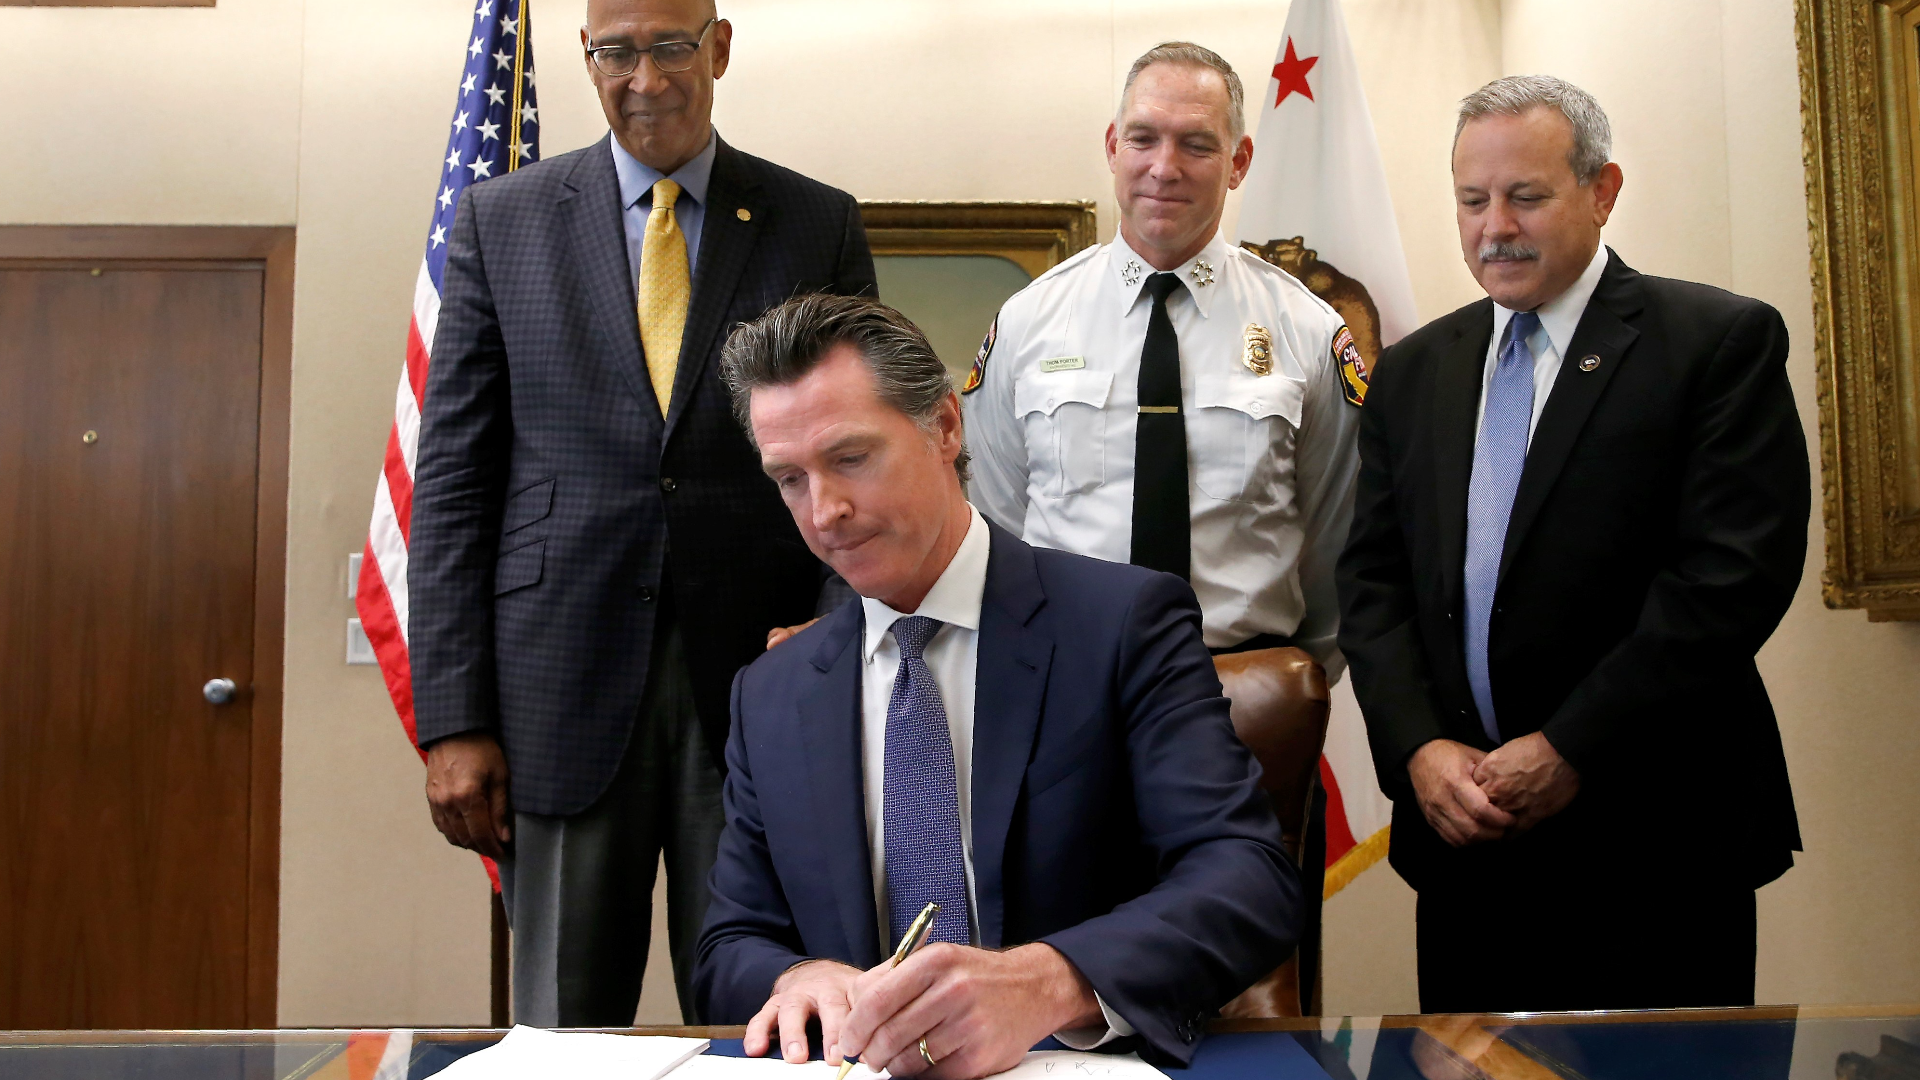 After Governor Gavin Newsom signed a bill that helped protect utility companies from the cost of future wildfires, he dismissed the idea that PG&E contributions have changed any of his actions.